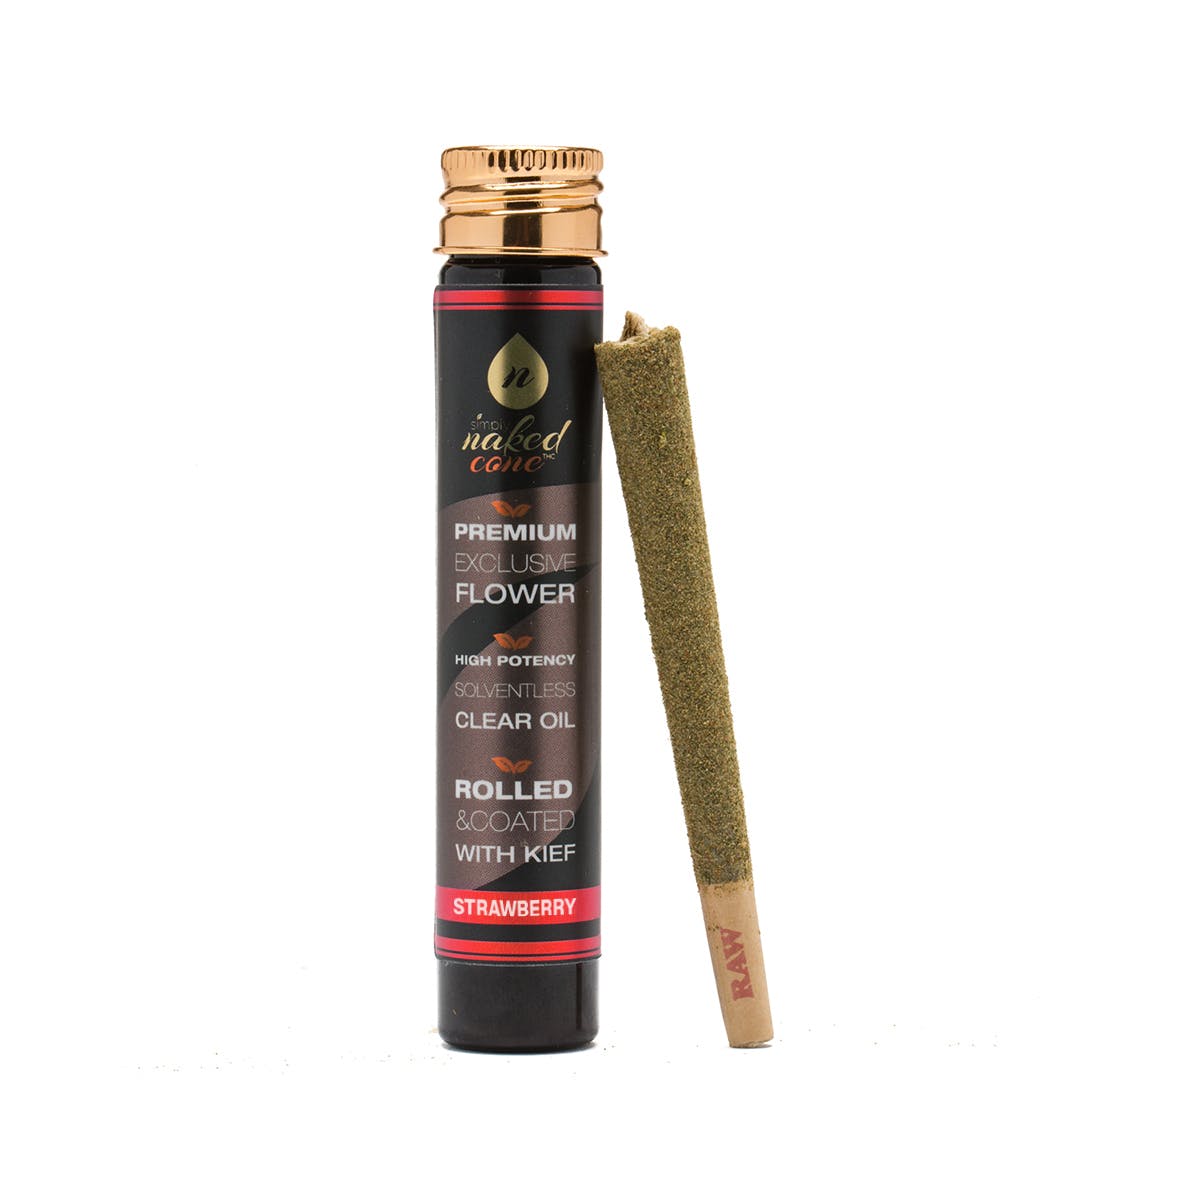 marijuana-dispensaries-the-plug-20-cap-collective-in-los-angeles-strawberry-simply-naked-cone